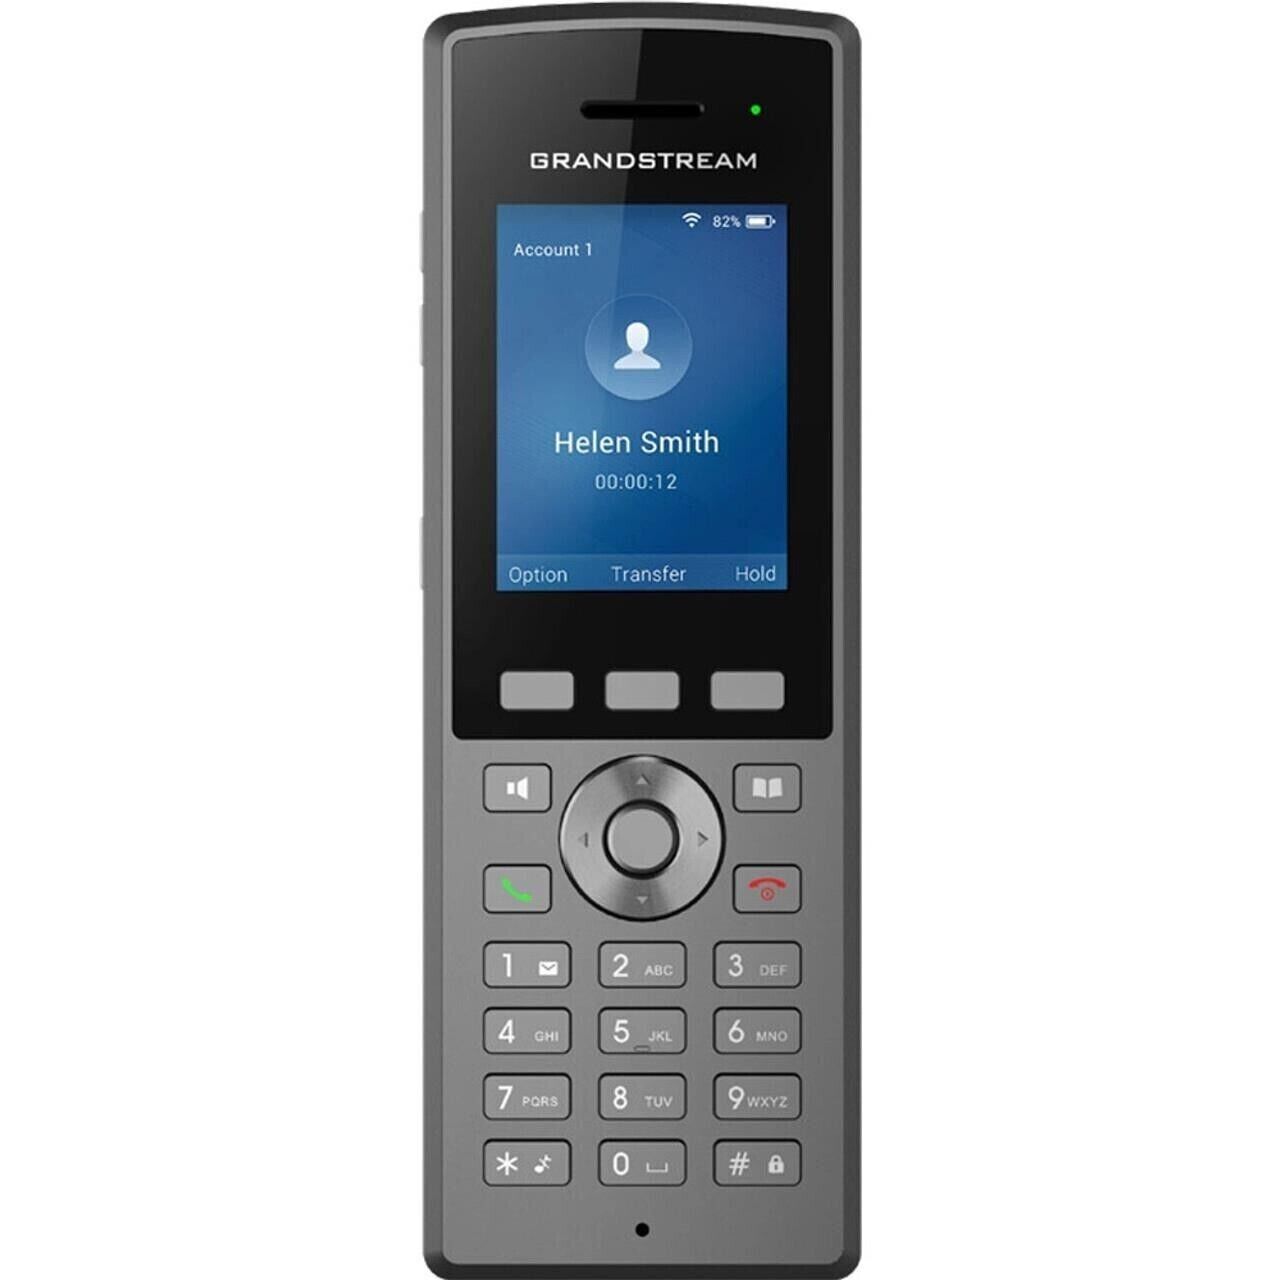 New - Grandstream Networks WP825 Ruggedized Portable WiFi VoIP Phone